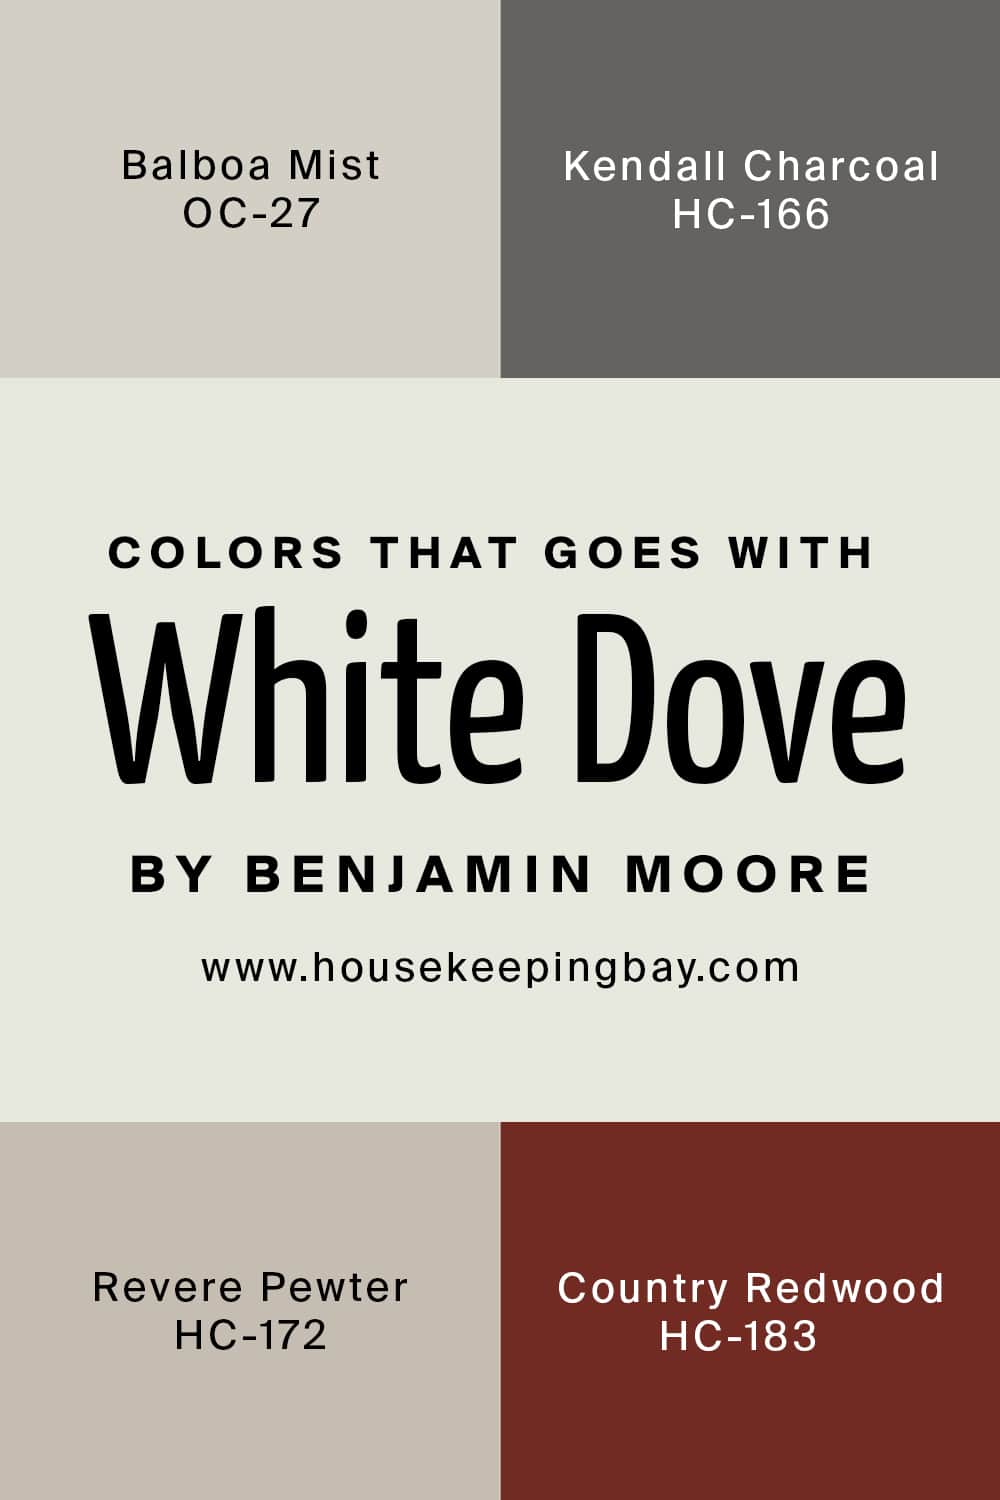 Colors that goes with White Dove by Benjamin Moore